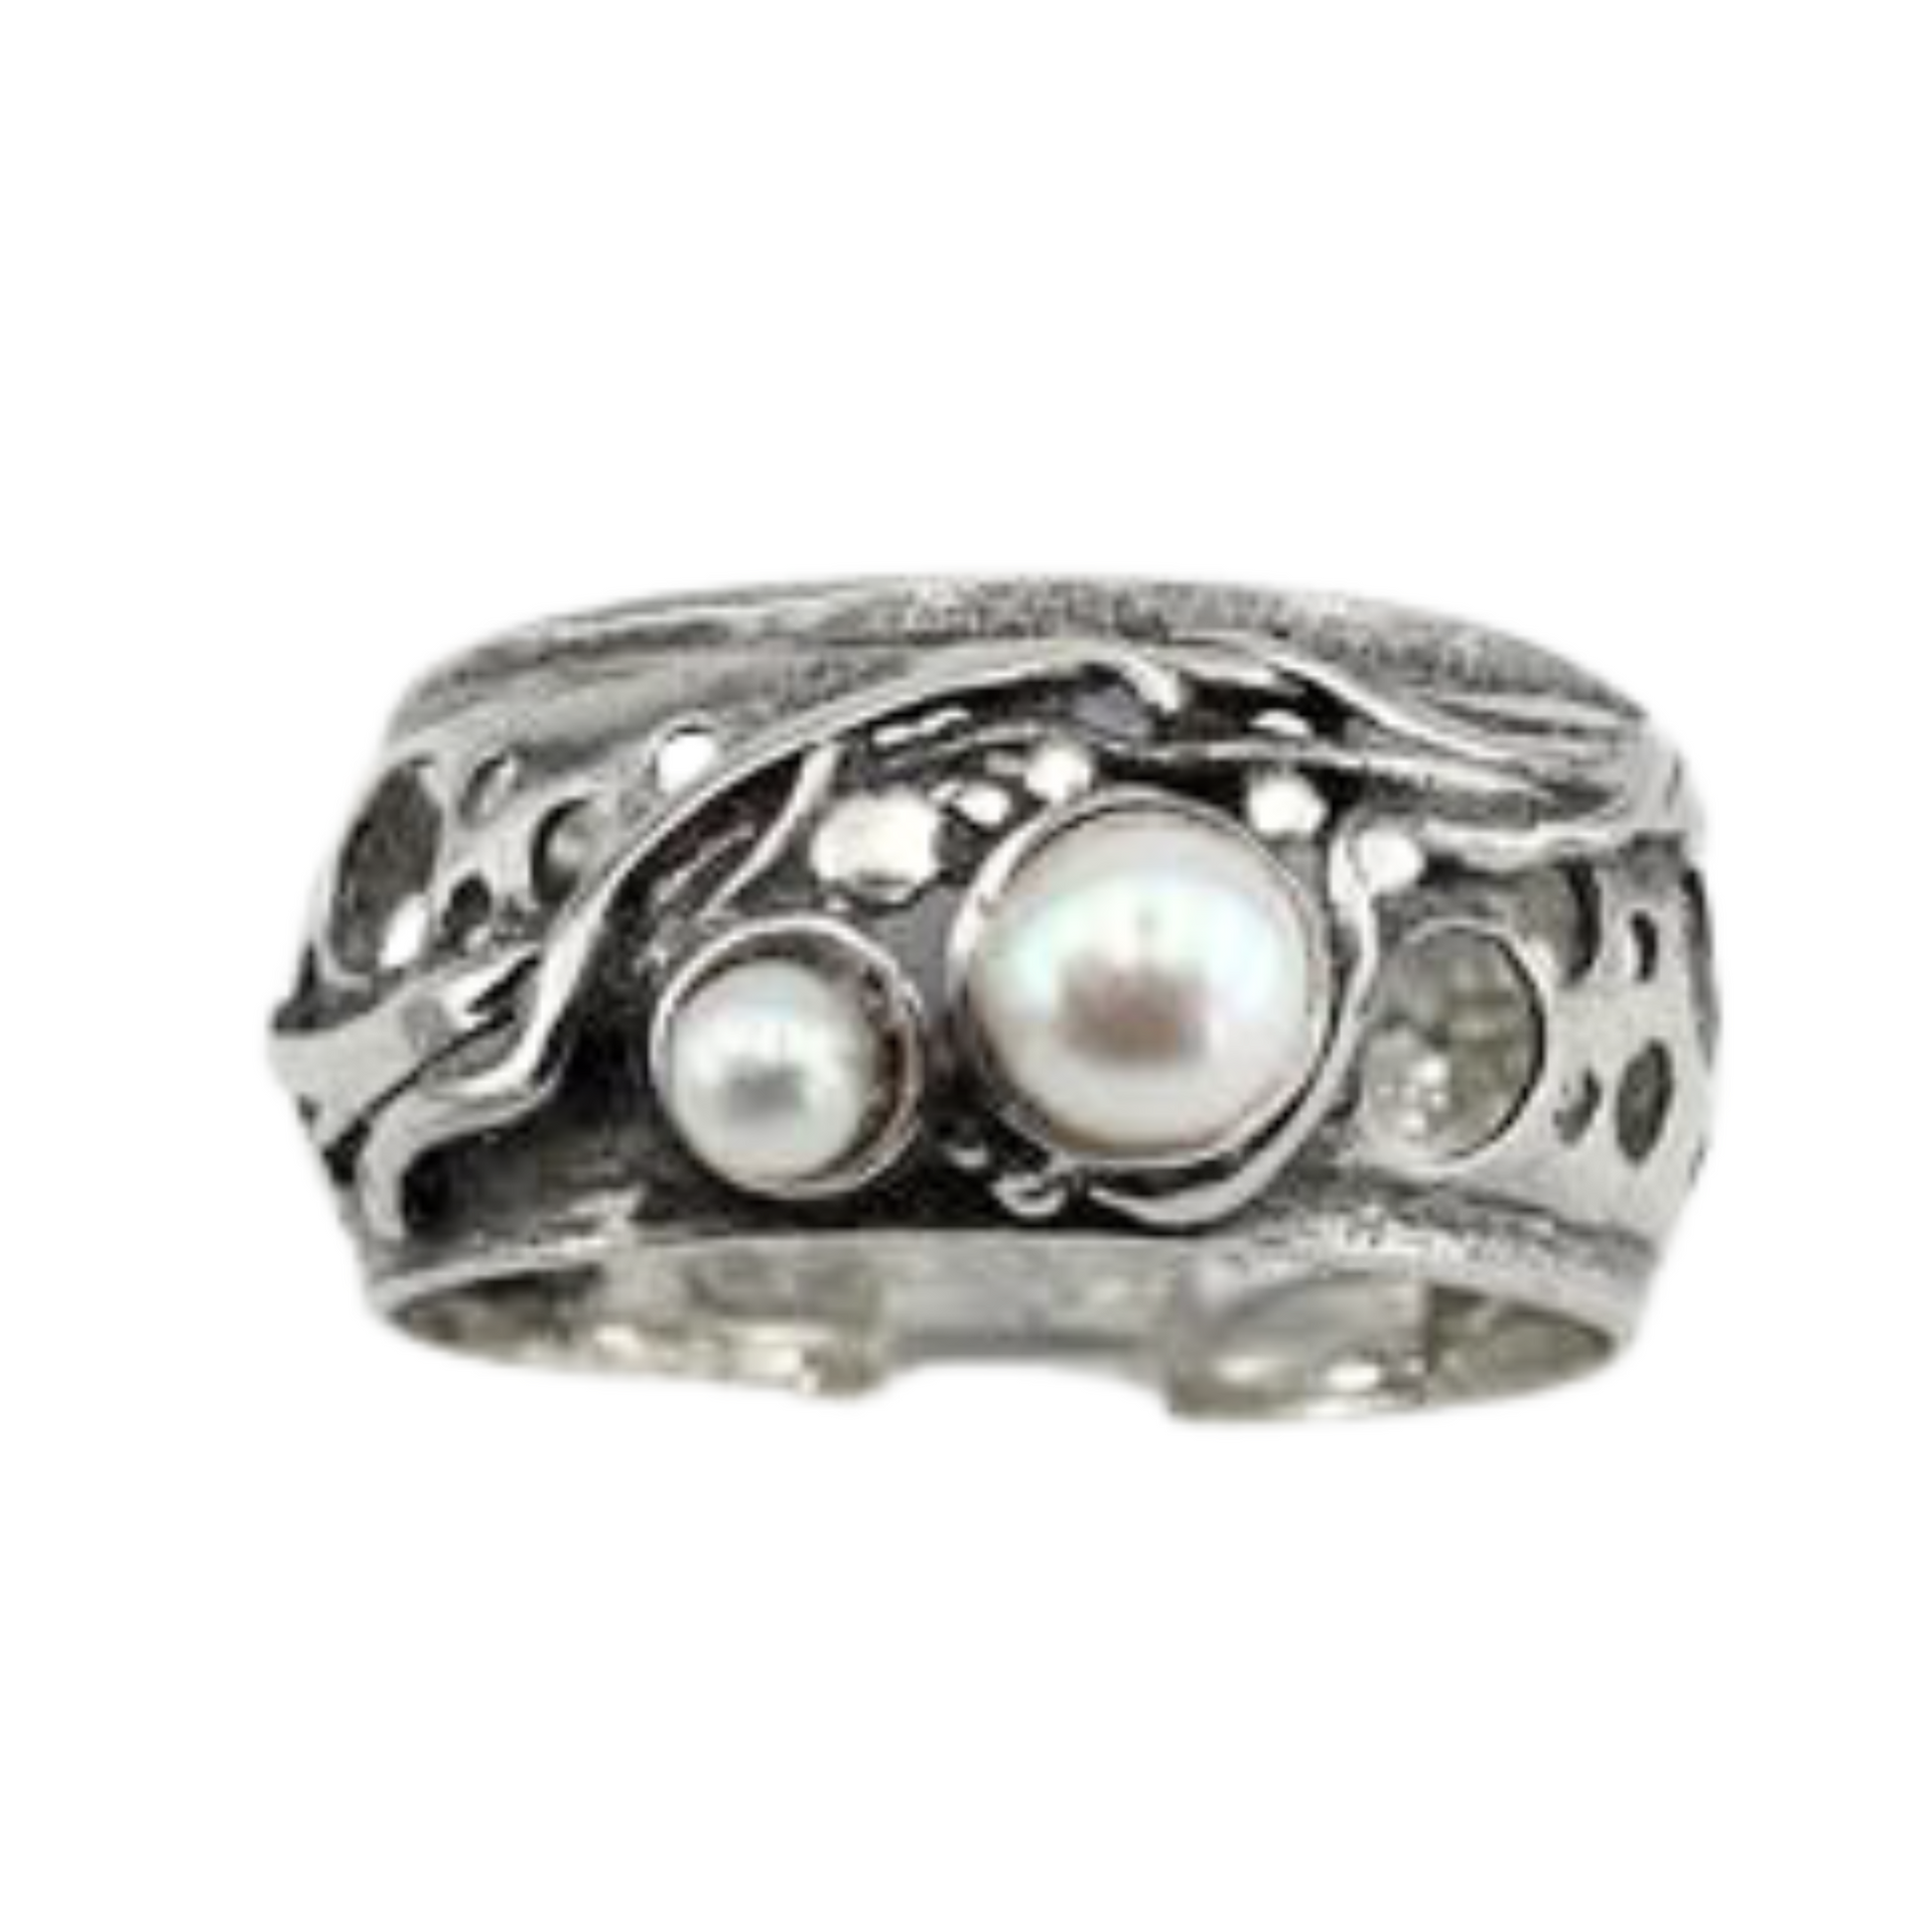 Pearl 4.5 ct Freshwater Pearl Bezel Set Sterling Silver Ring, Size 6.5 -  Northern Lights Vedic